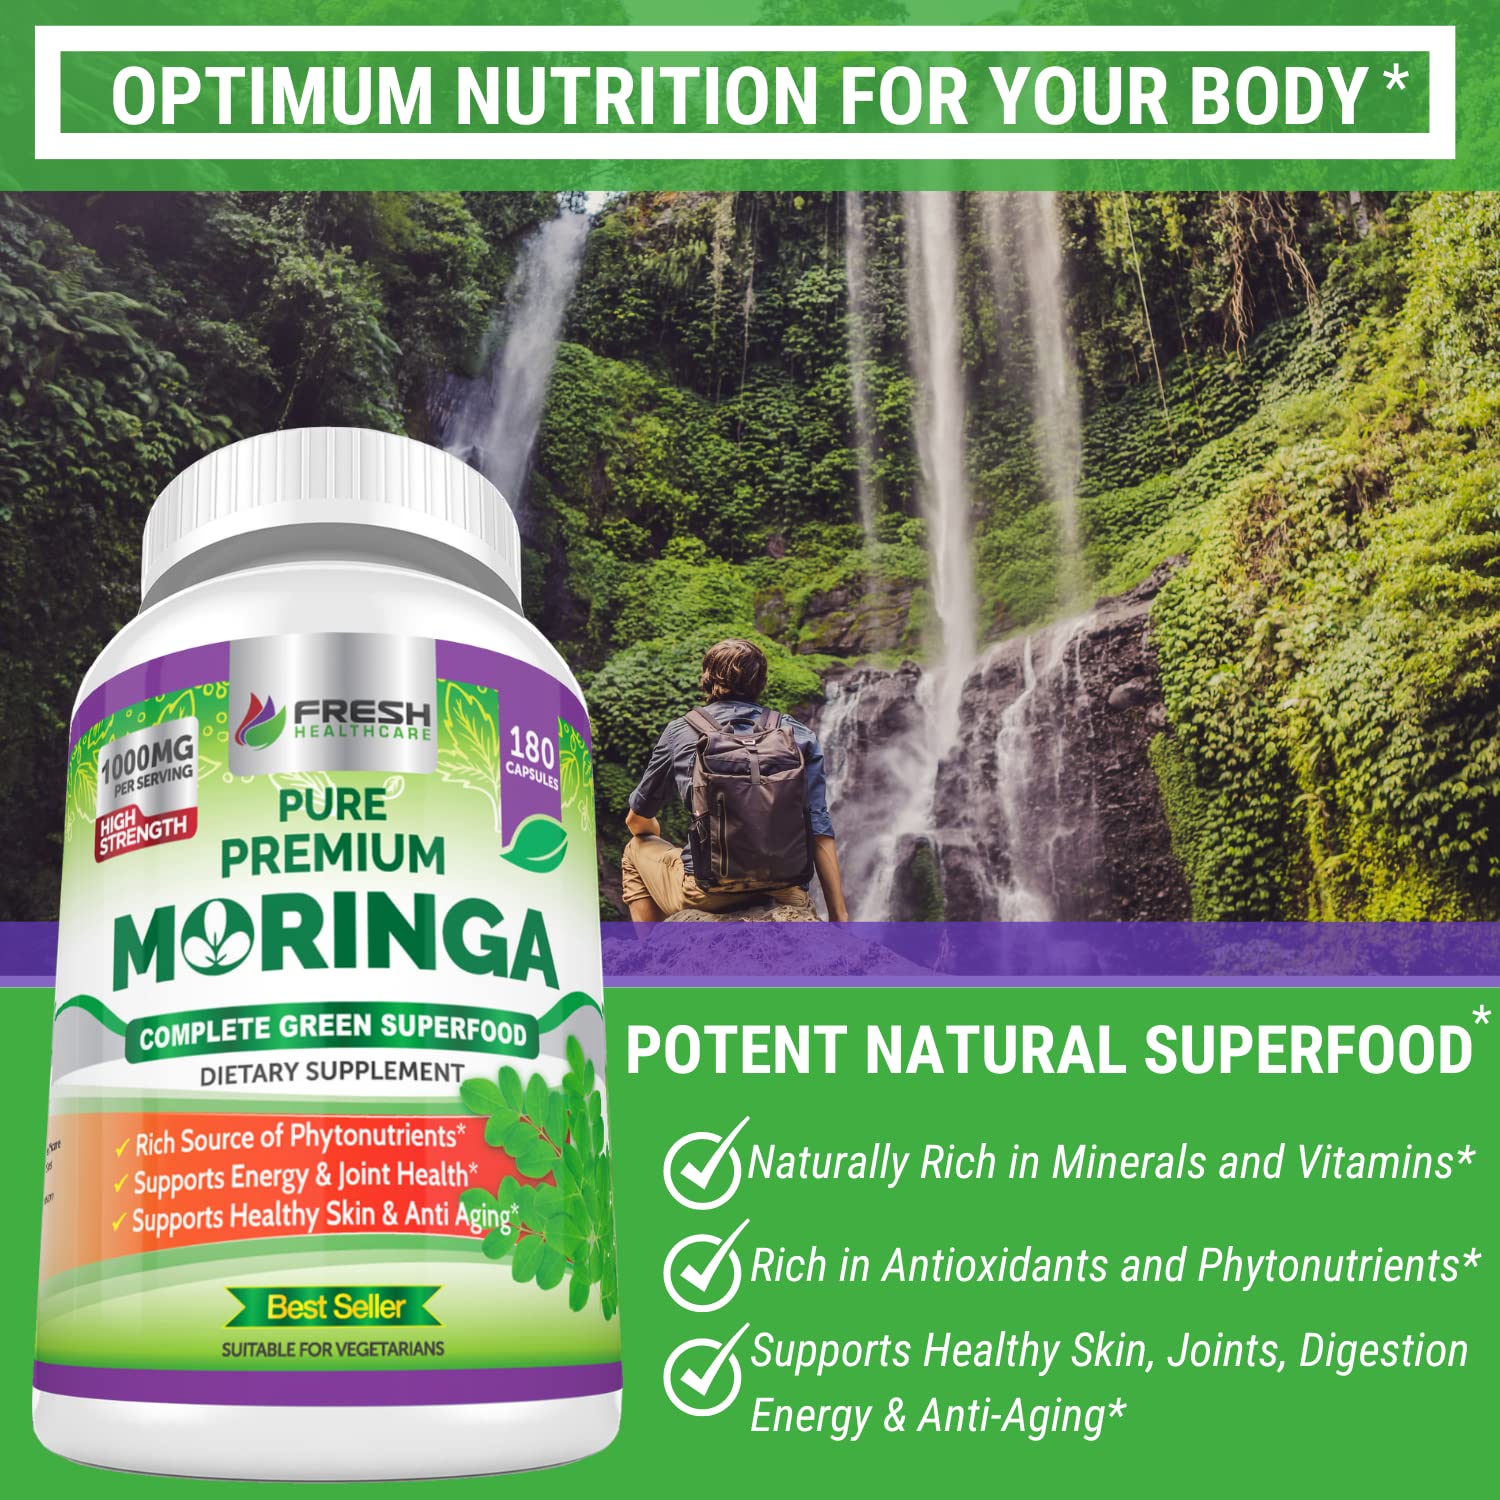 FRESH HEALTHCARE Moringa Oleifera 180 Capsules – 100% Pure Leaf Powder - 3 Month Supply - Non GMO and Gluten Free - Complete Green Superfood Supplement - Energy, Metabolism and Immune Support